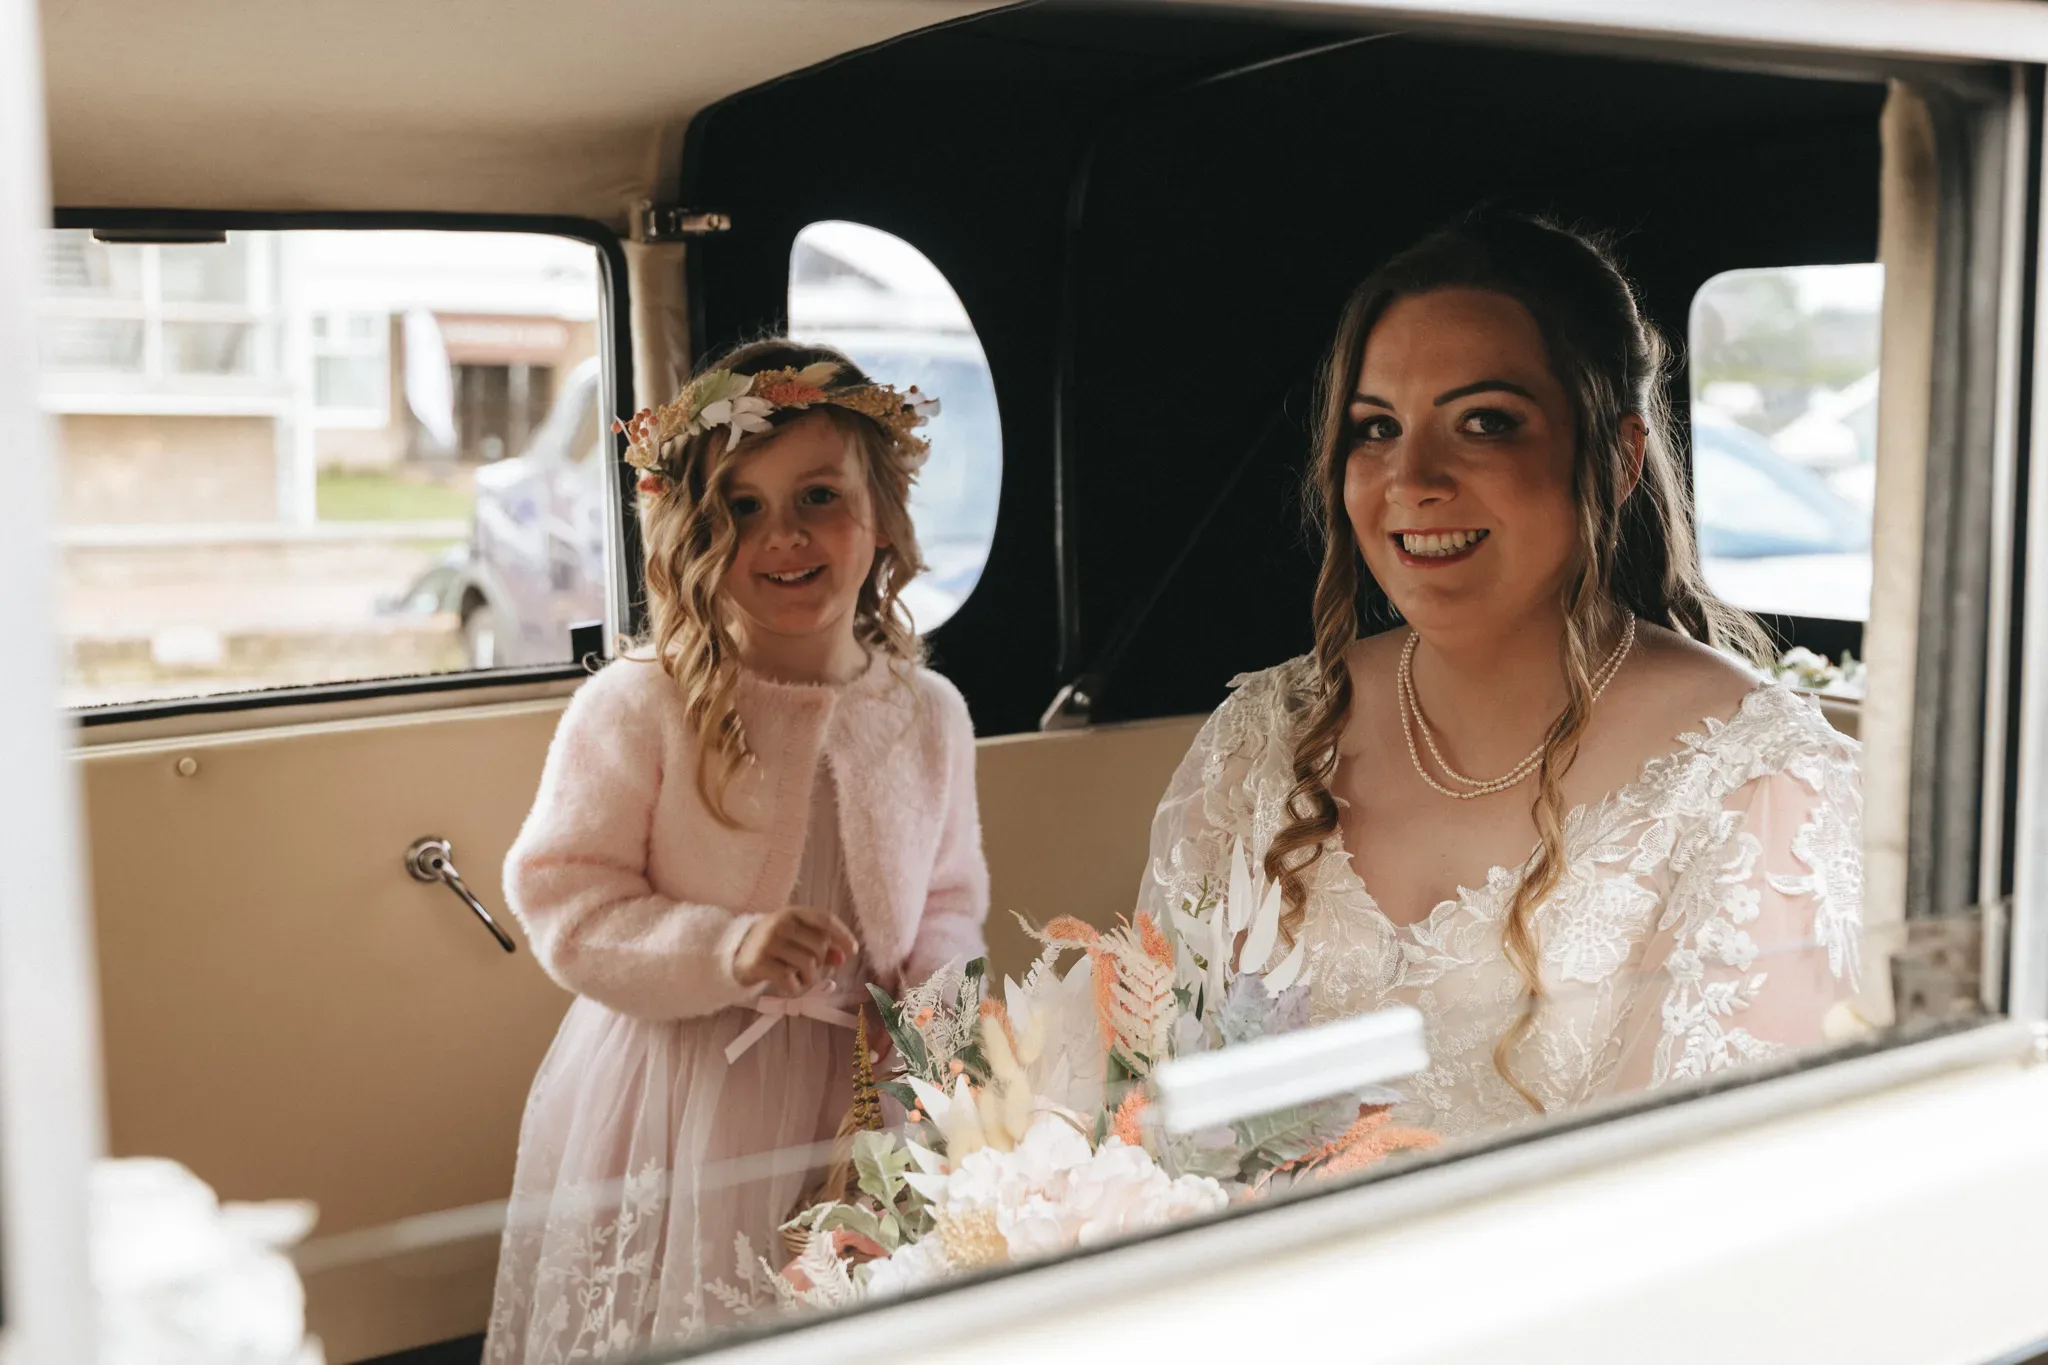 A bride and a young girl in a flower crown smile inside a vintage car, holding a bouquet. the bride wears a lace dress and the child a pink coat. they appear joyful, framed by the car window.